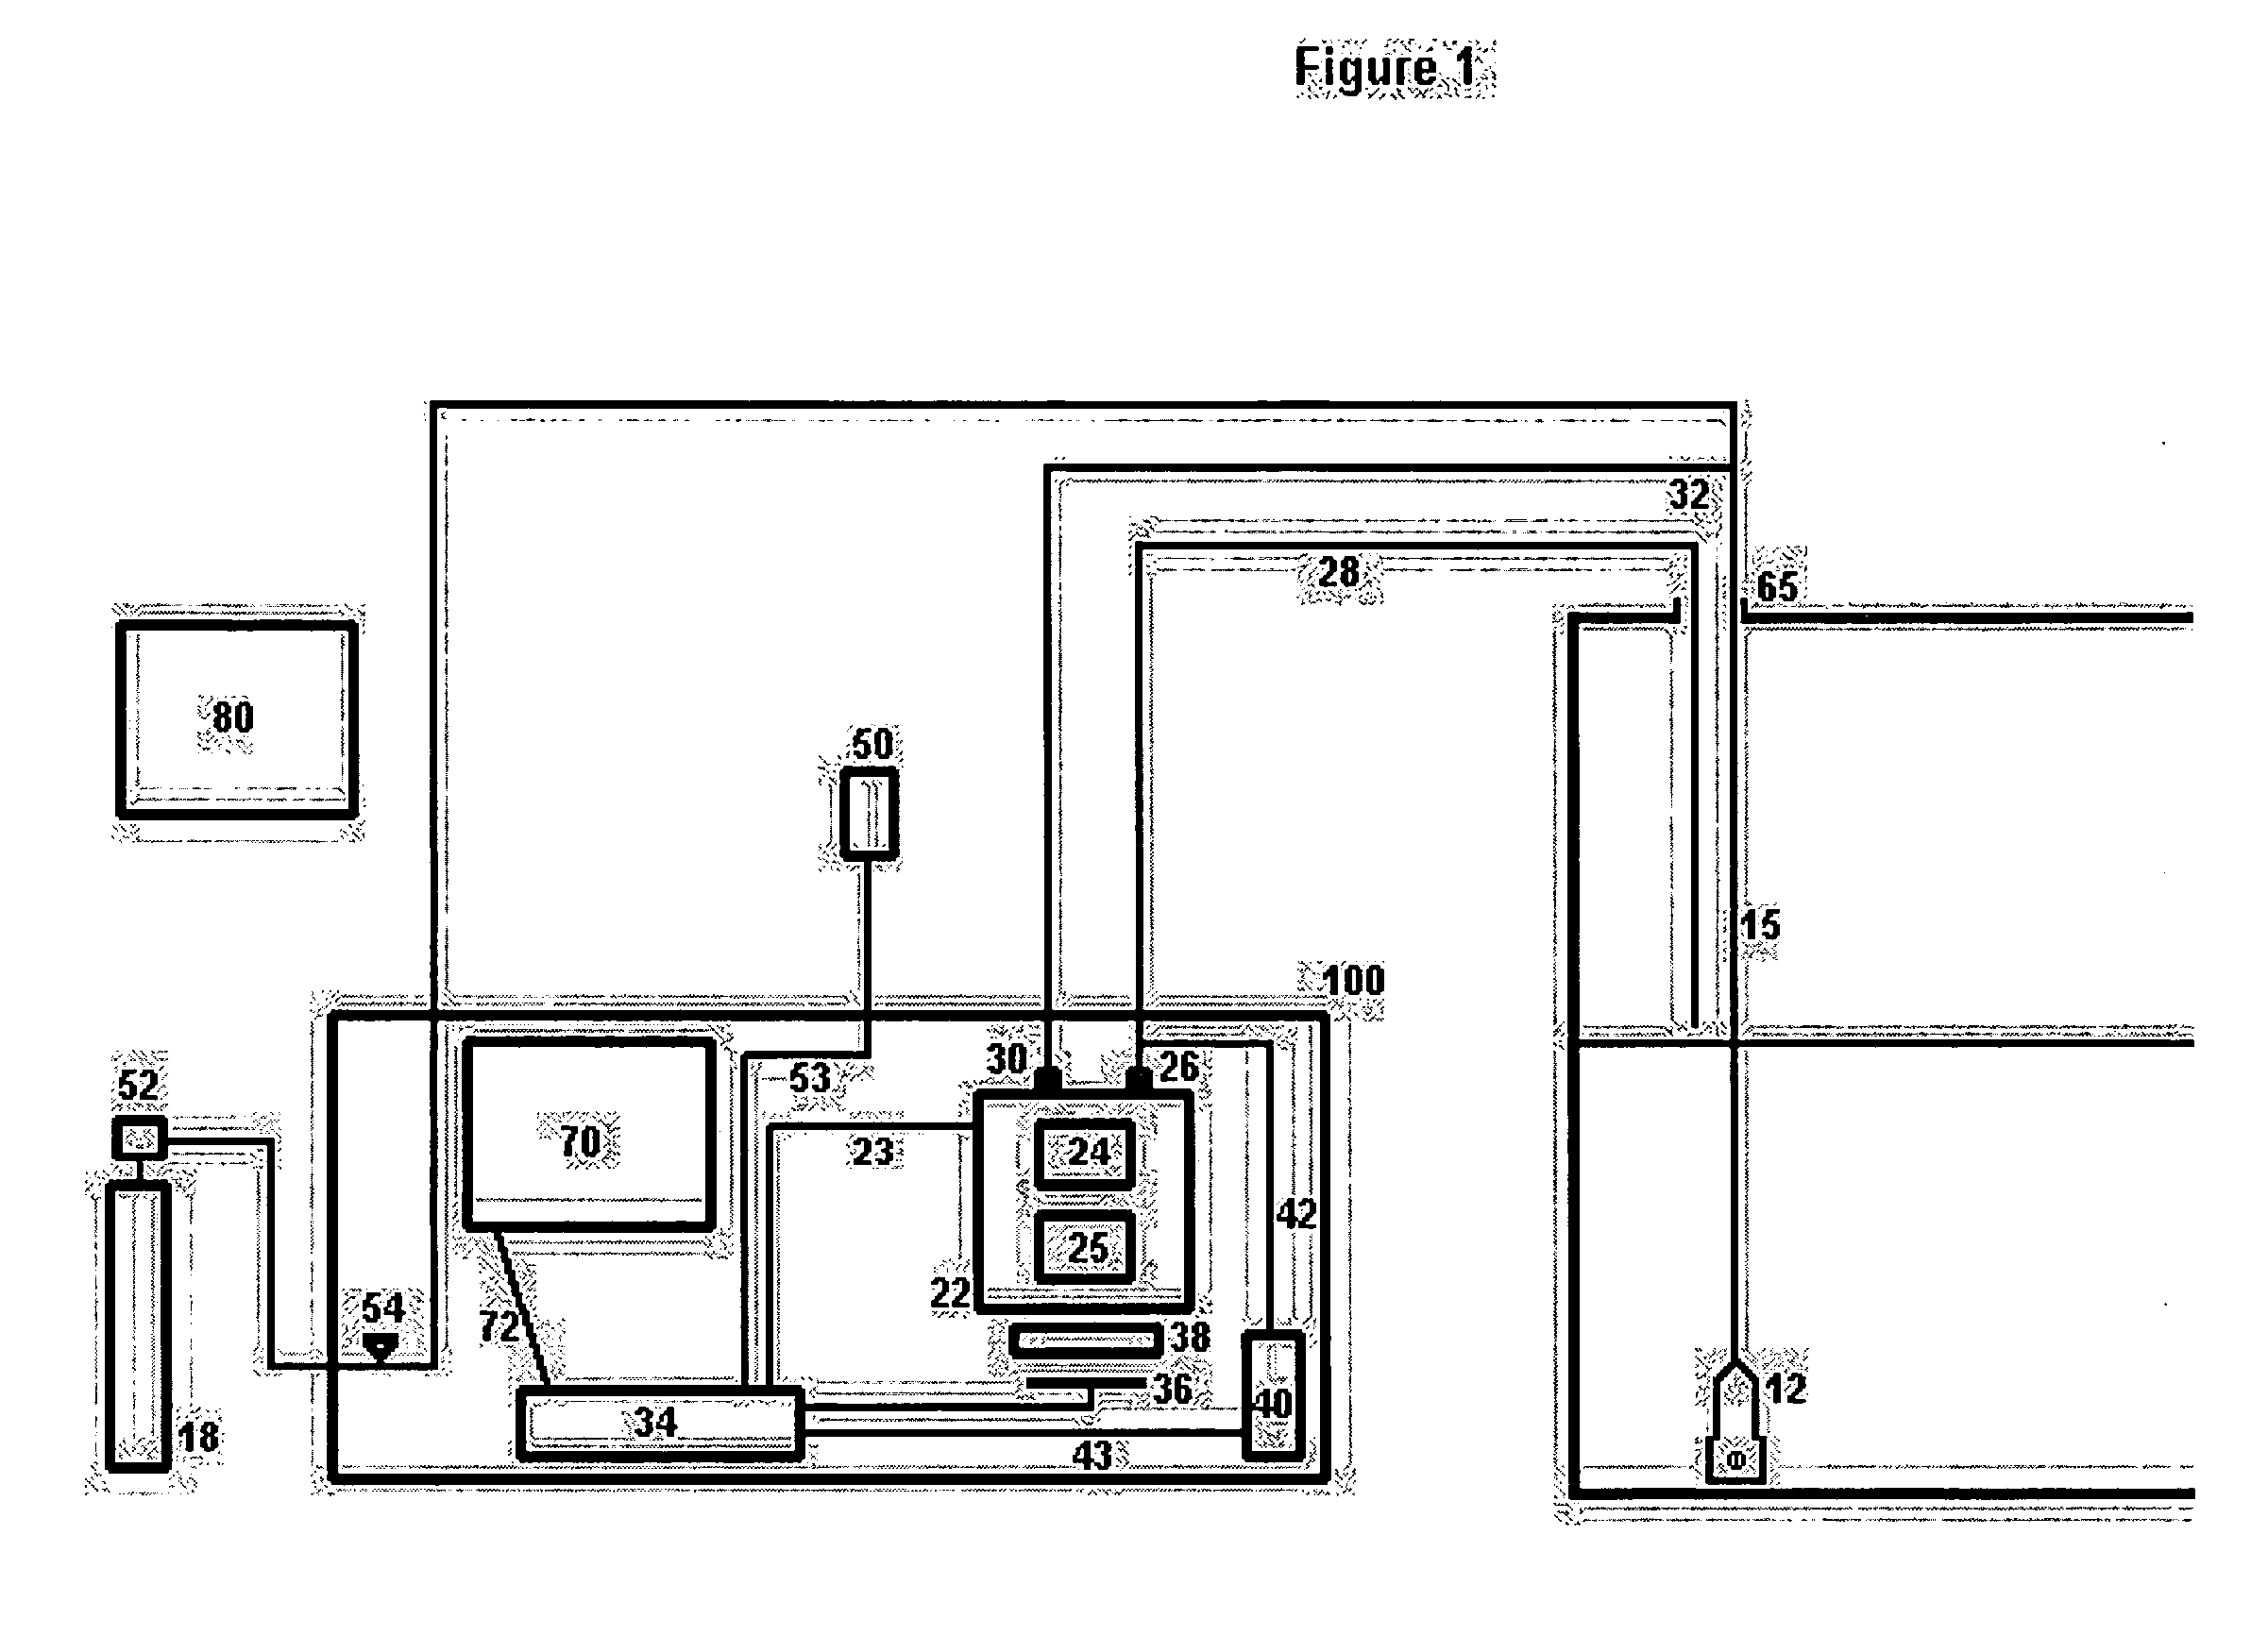 System and method for detecting and quantifying changes in the mass content of liquid storage containers